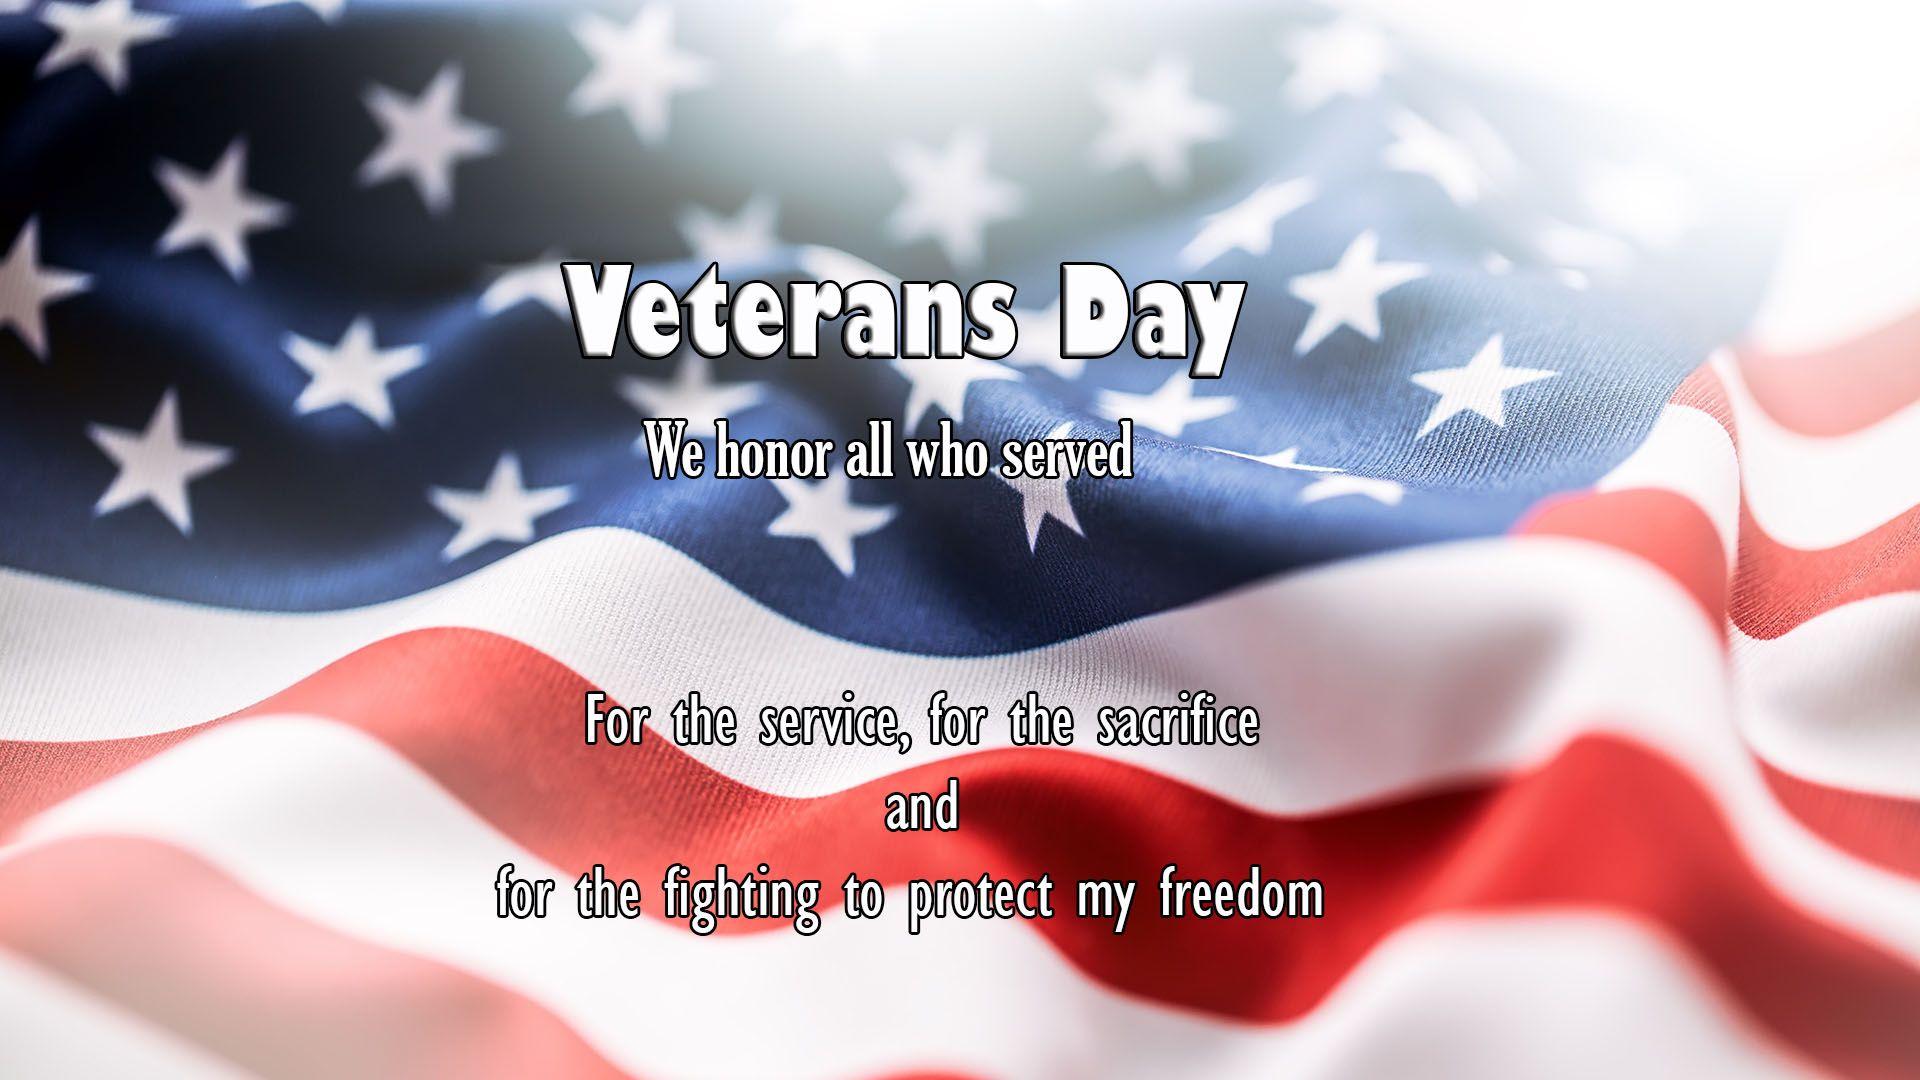 Happy Veterans Day 2017 HD Wallpaper, Cards & Picture. Car